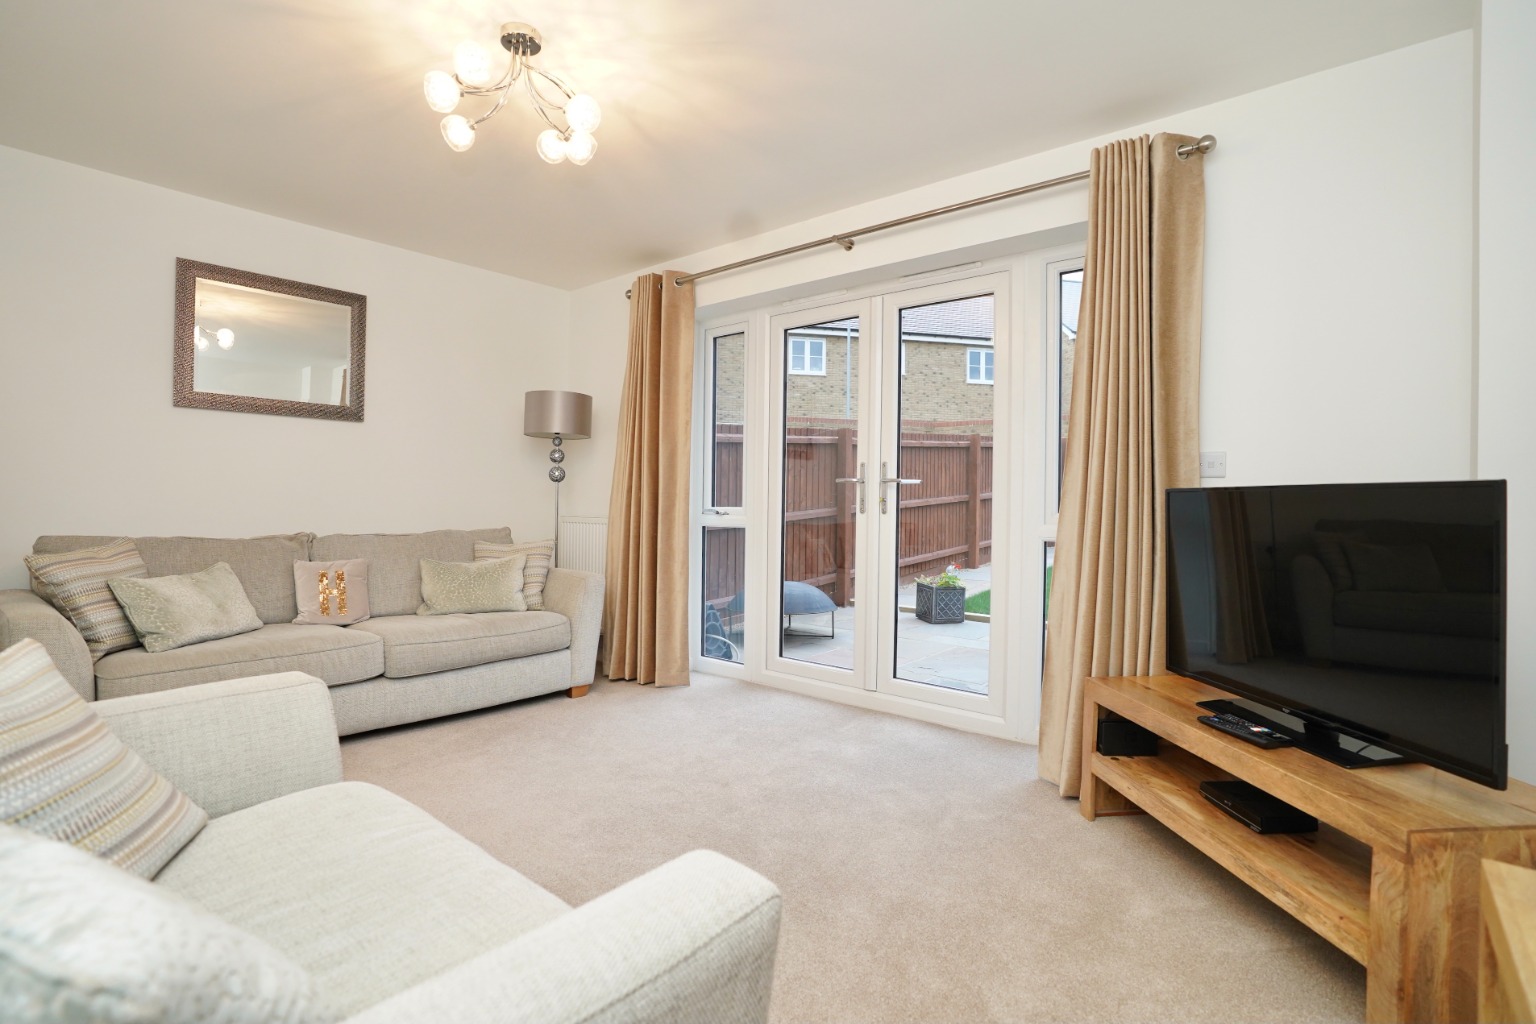 3 bed terraced house for sale in Gardener Crescent, Huntingdon  - Property Image 3